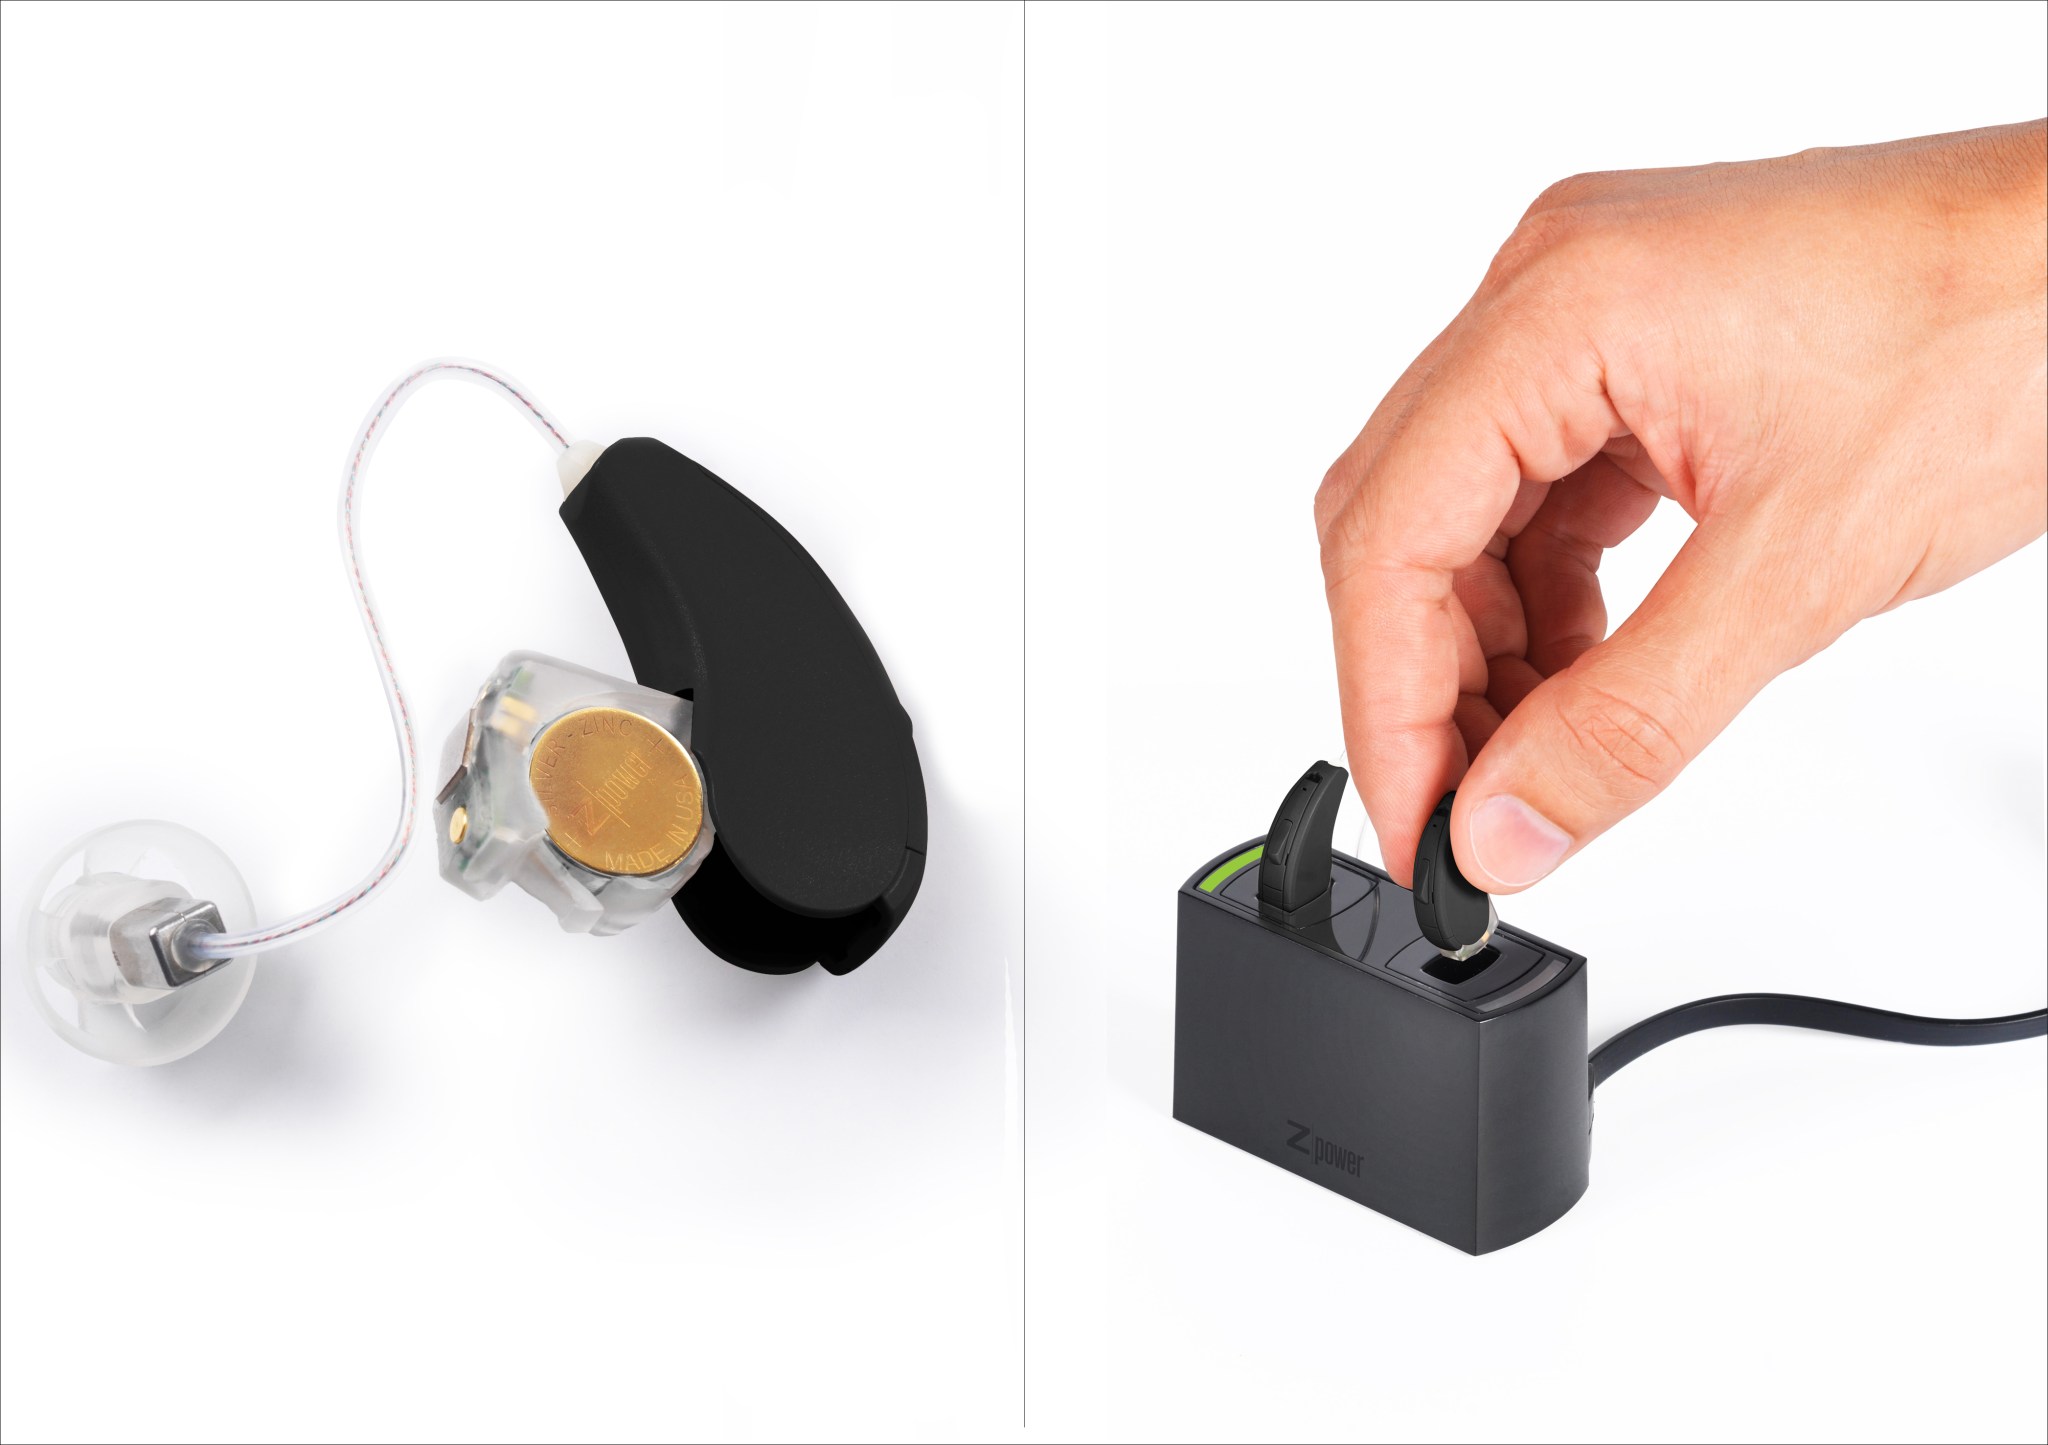 Hearing aid, and replacing battery.